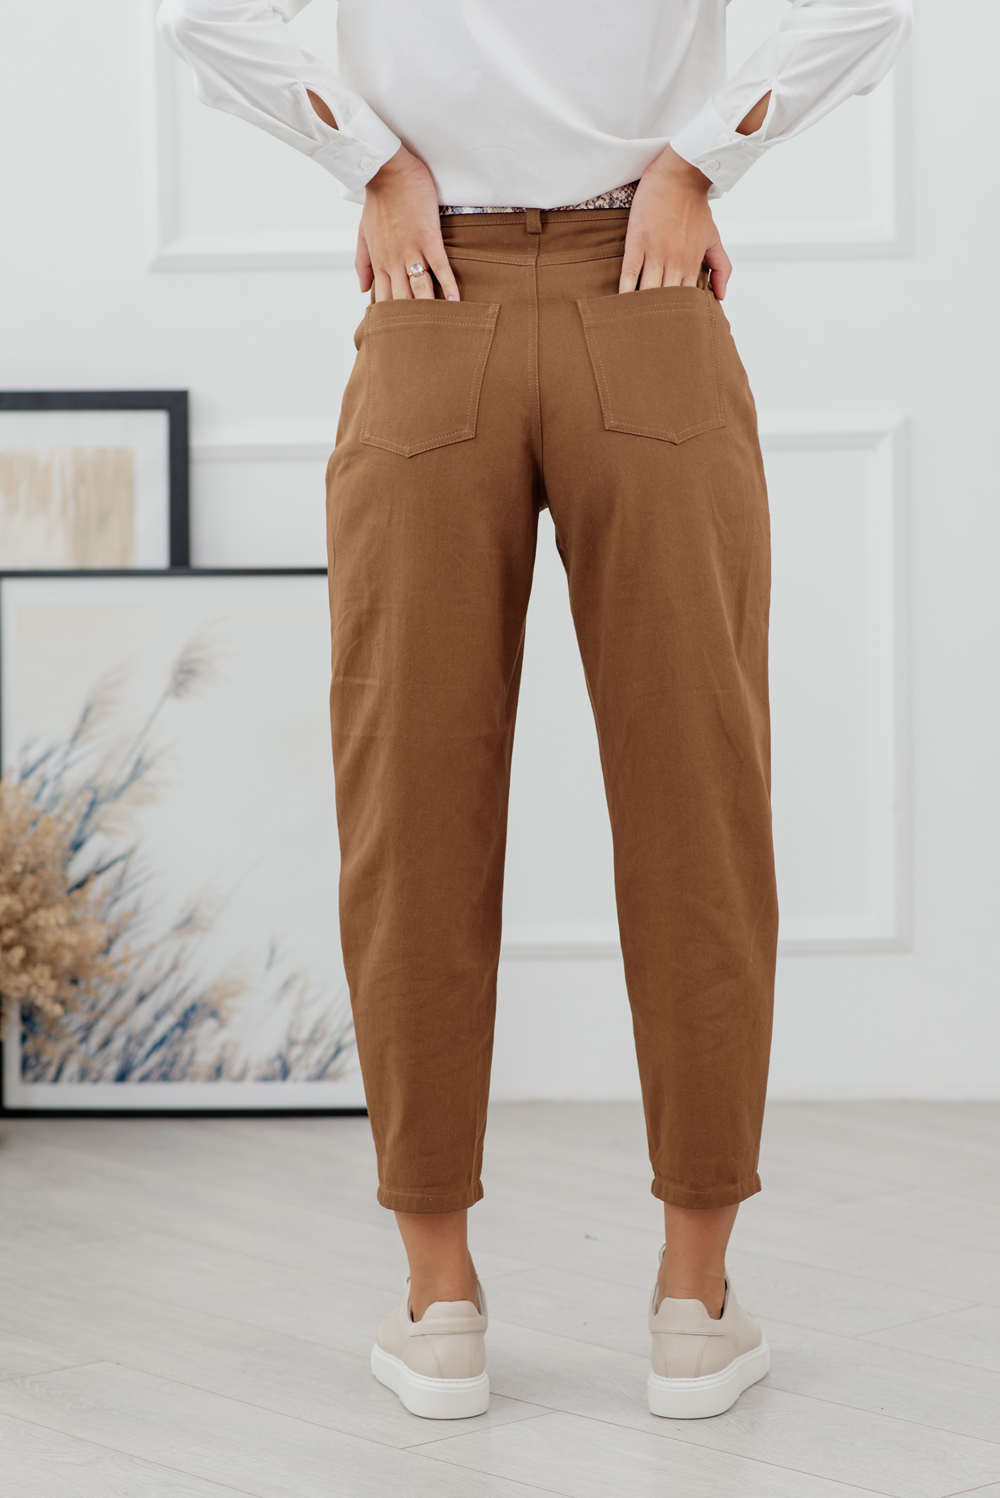 Caramel jeans with pockets and pleats